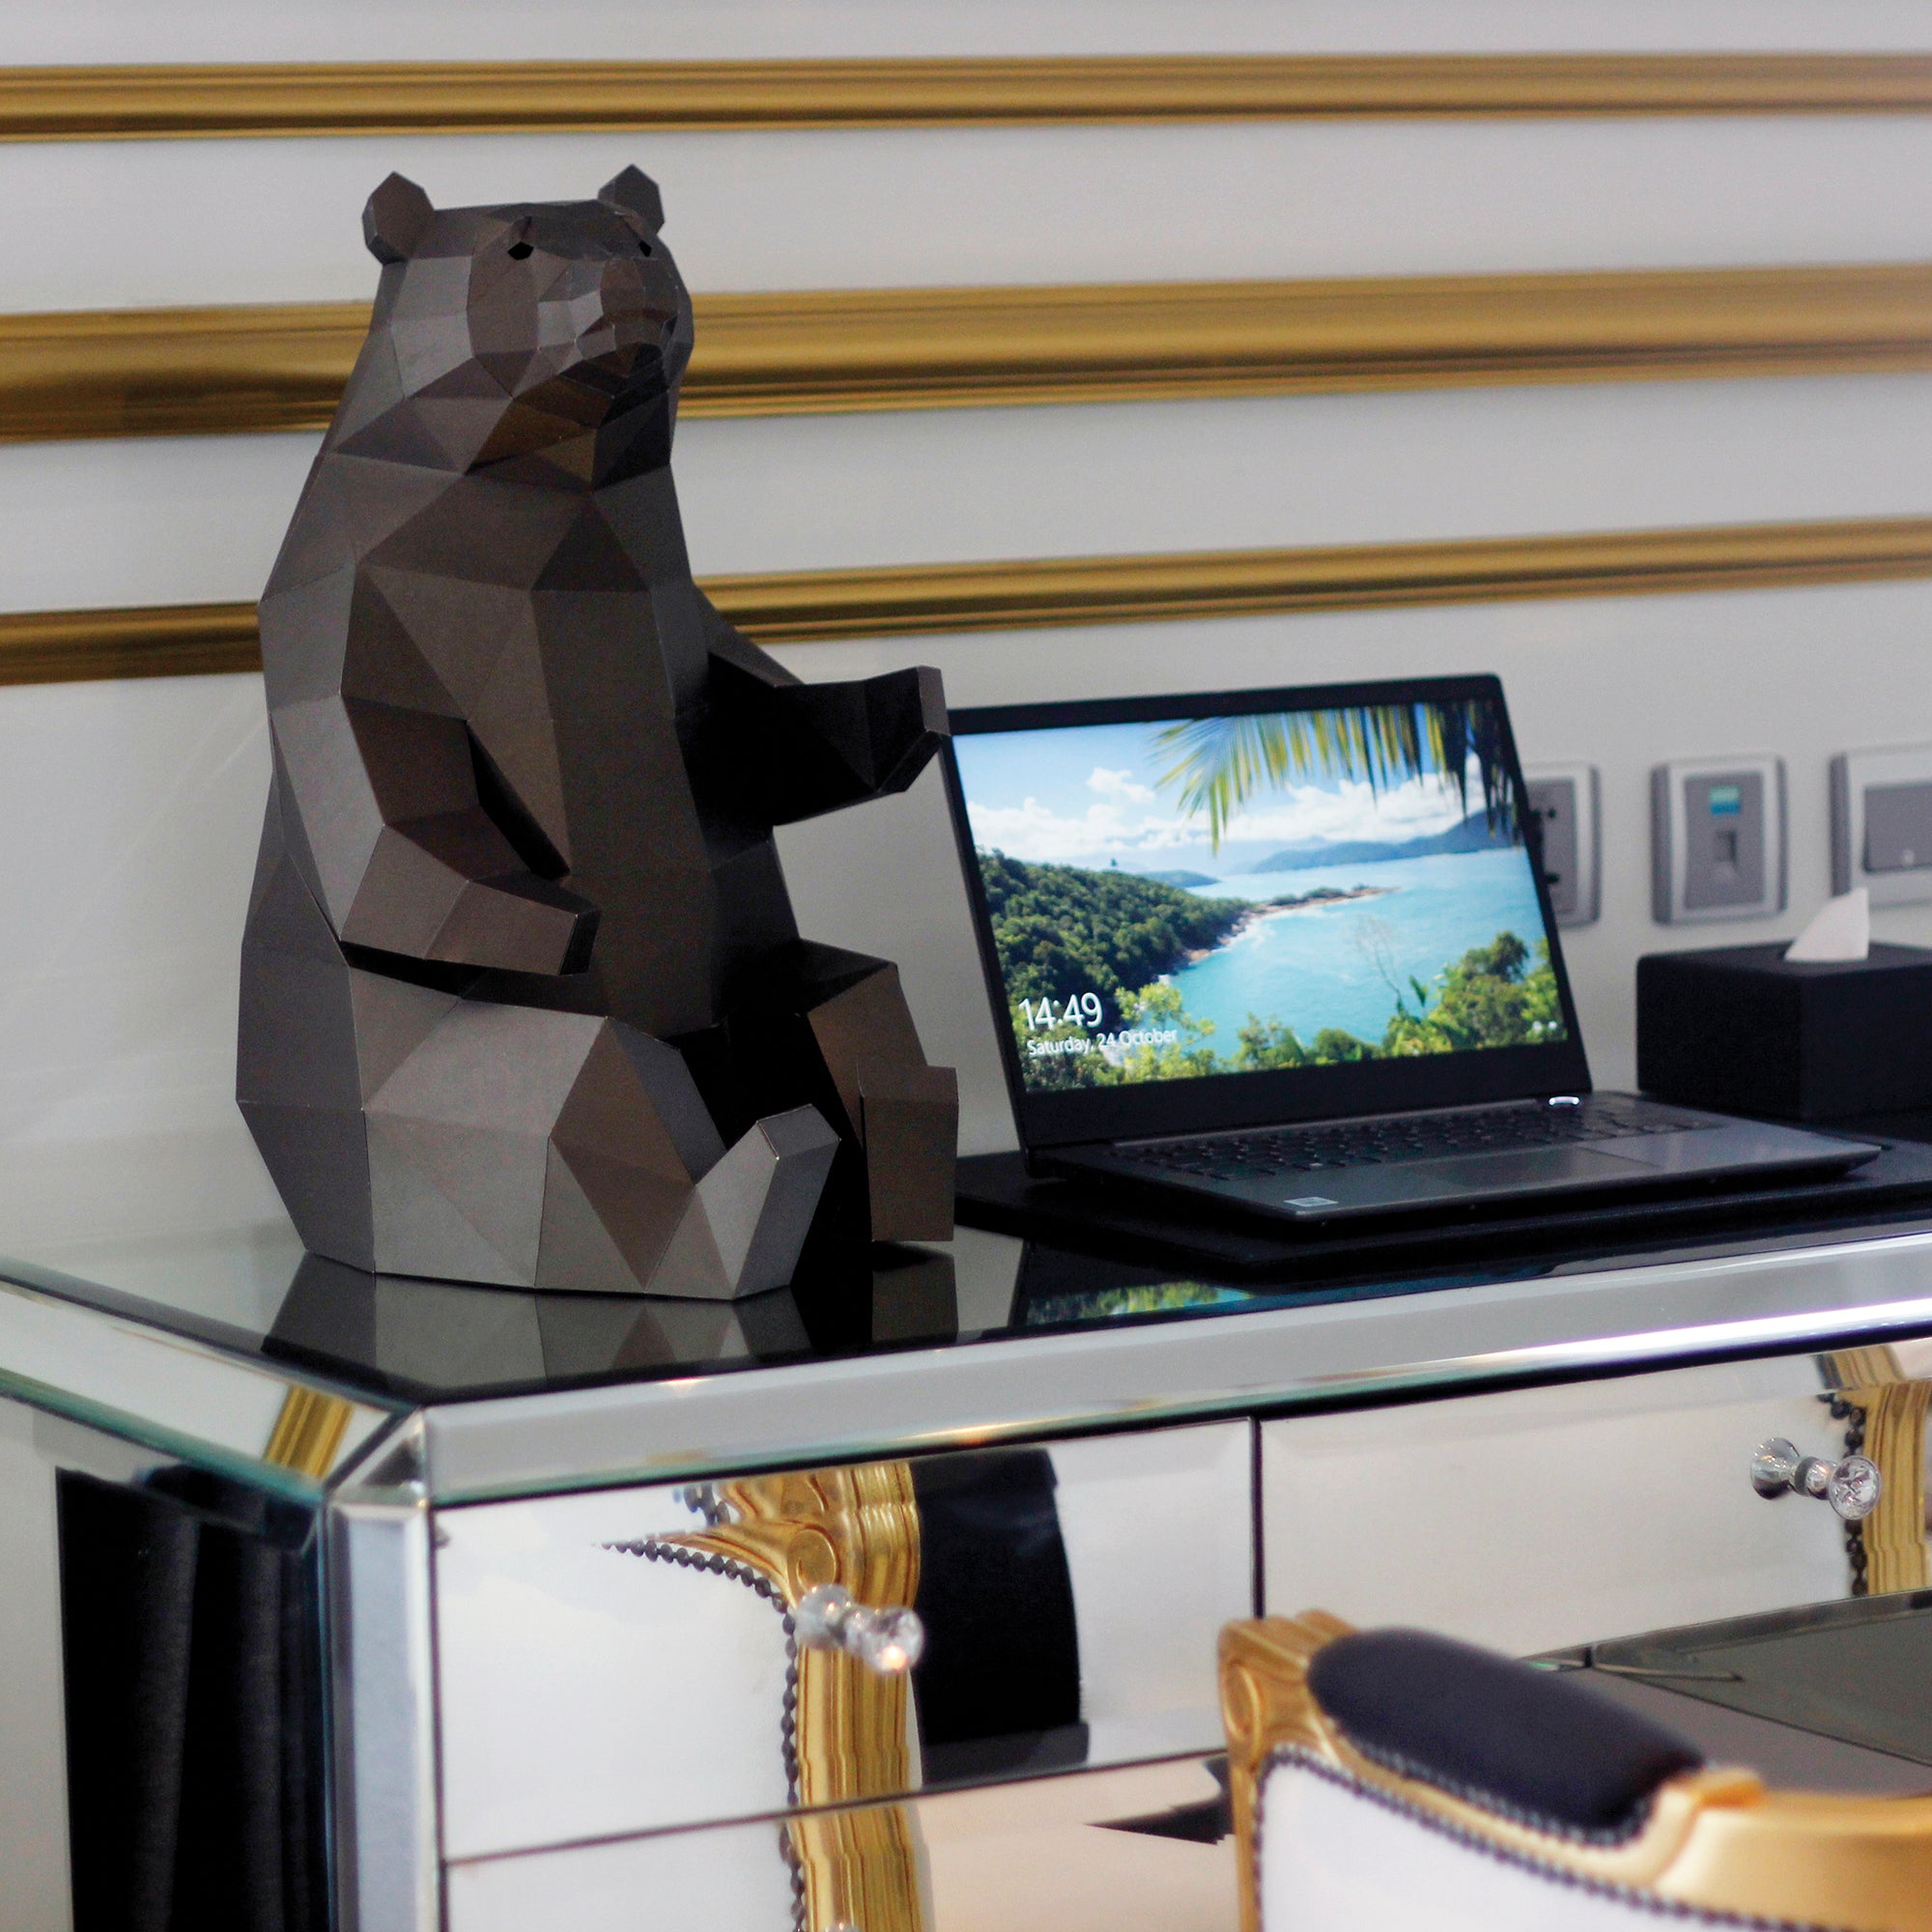 Dark brown Geometrical-shaped Papercraft bear that is folded and cut paper pieces glued together sitting on top of a mirrored desk. Next to the bear is a laptop and tissue box in front of a white wall with gold trim.